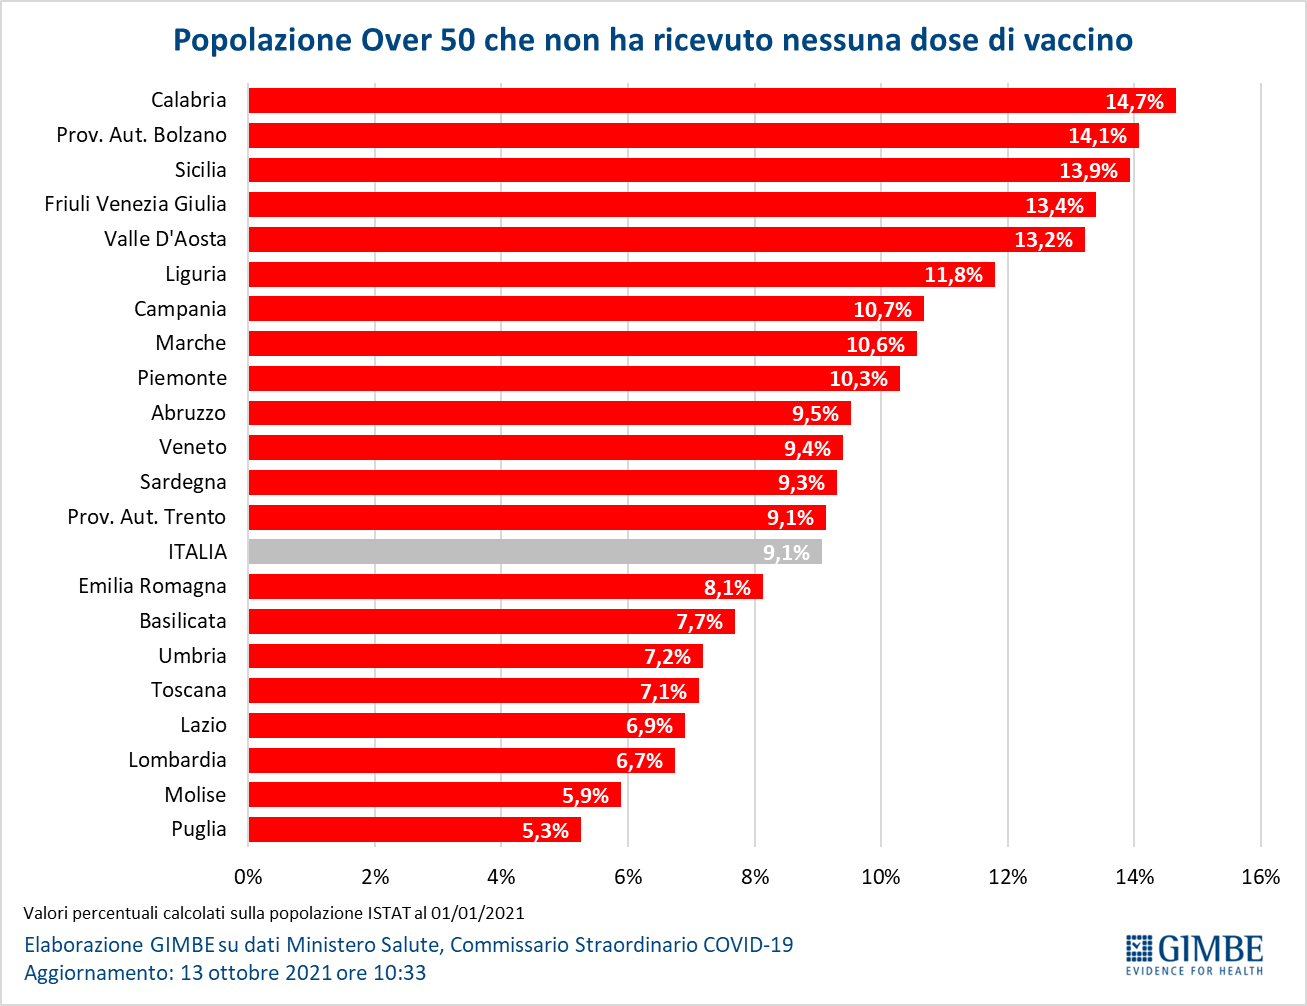 Percentage of over-50s by region who had not received a single dose of the coronavirus vaccine as of October 13, 2021